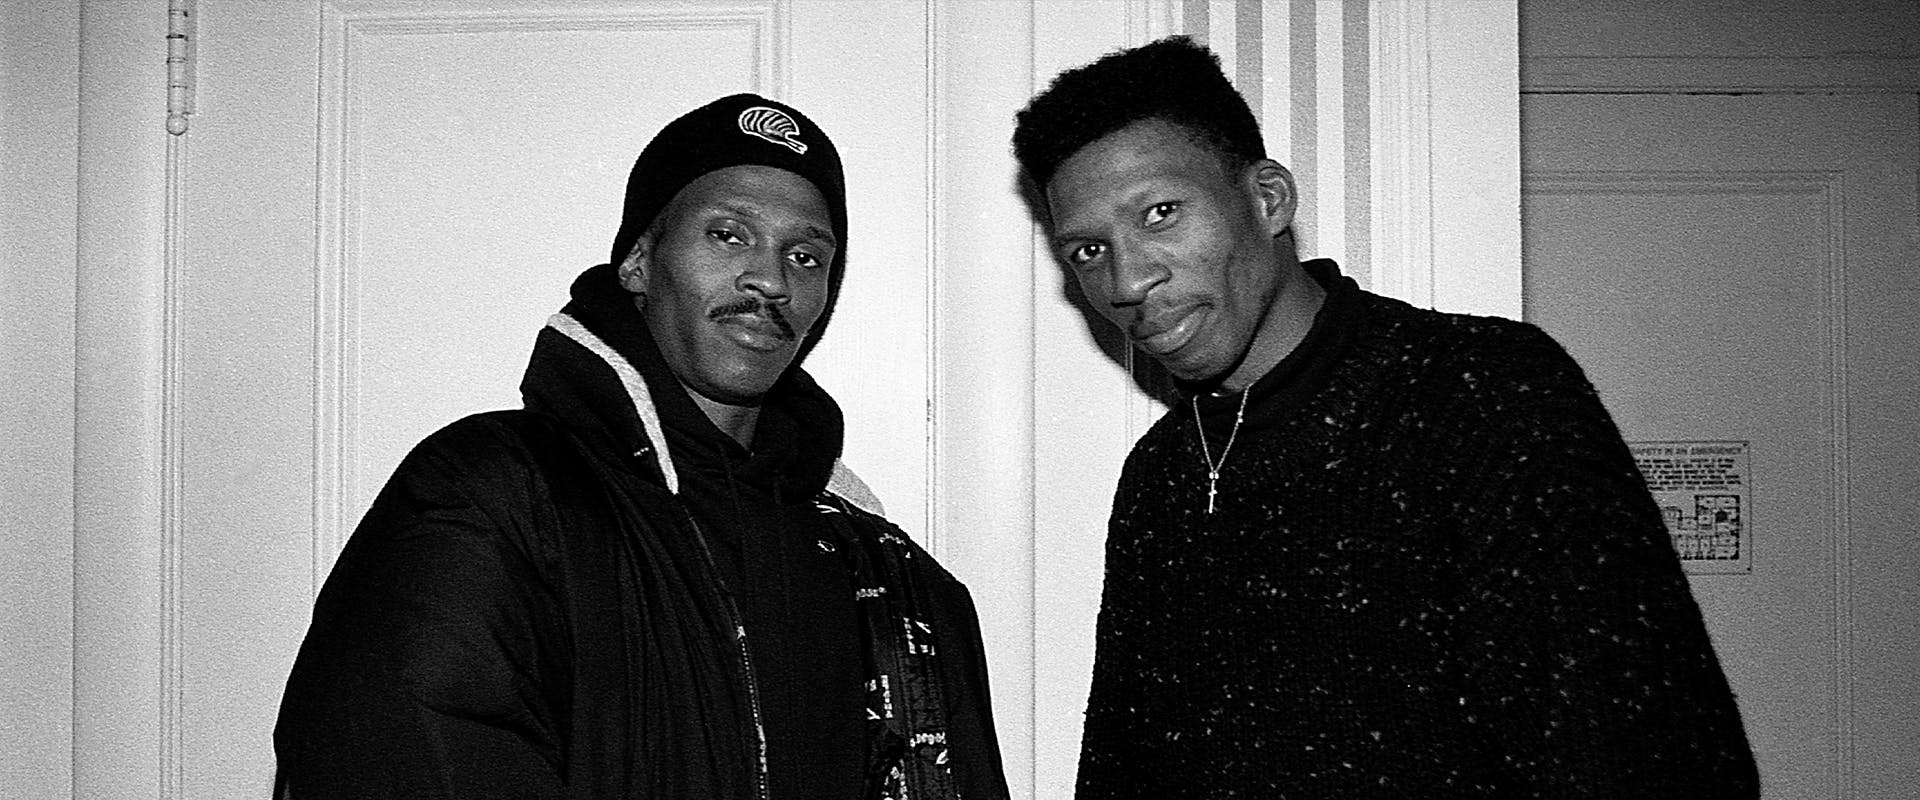 Music producers Keith and Hank Shocklee of hip-hop production team The Bomb Squad, poses for photos at the Blackstone Hotel in Chicago, Illinois in November 1990. (Photo By Raymond Boyd/Getty Images)